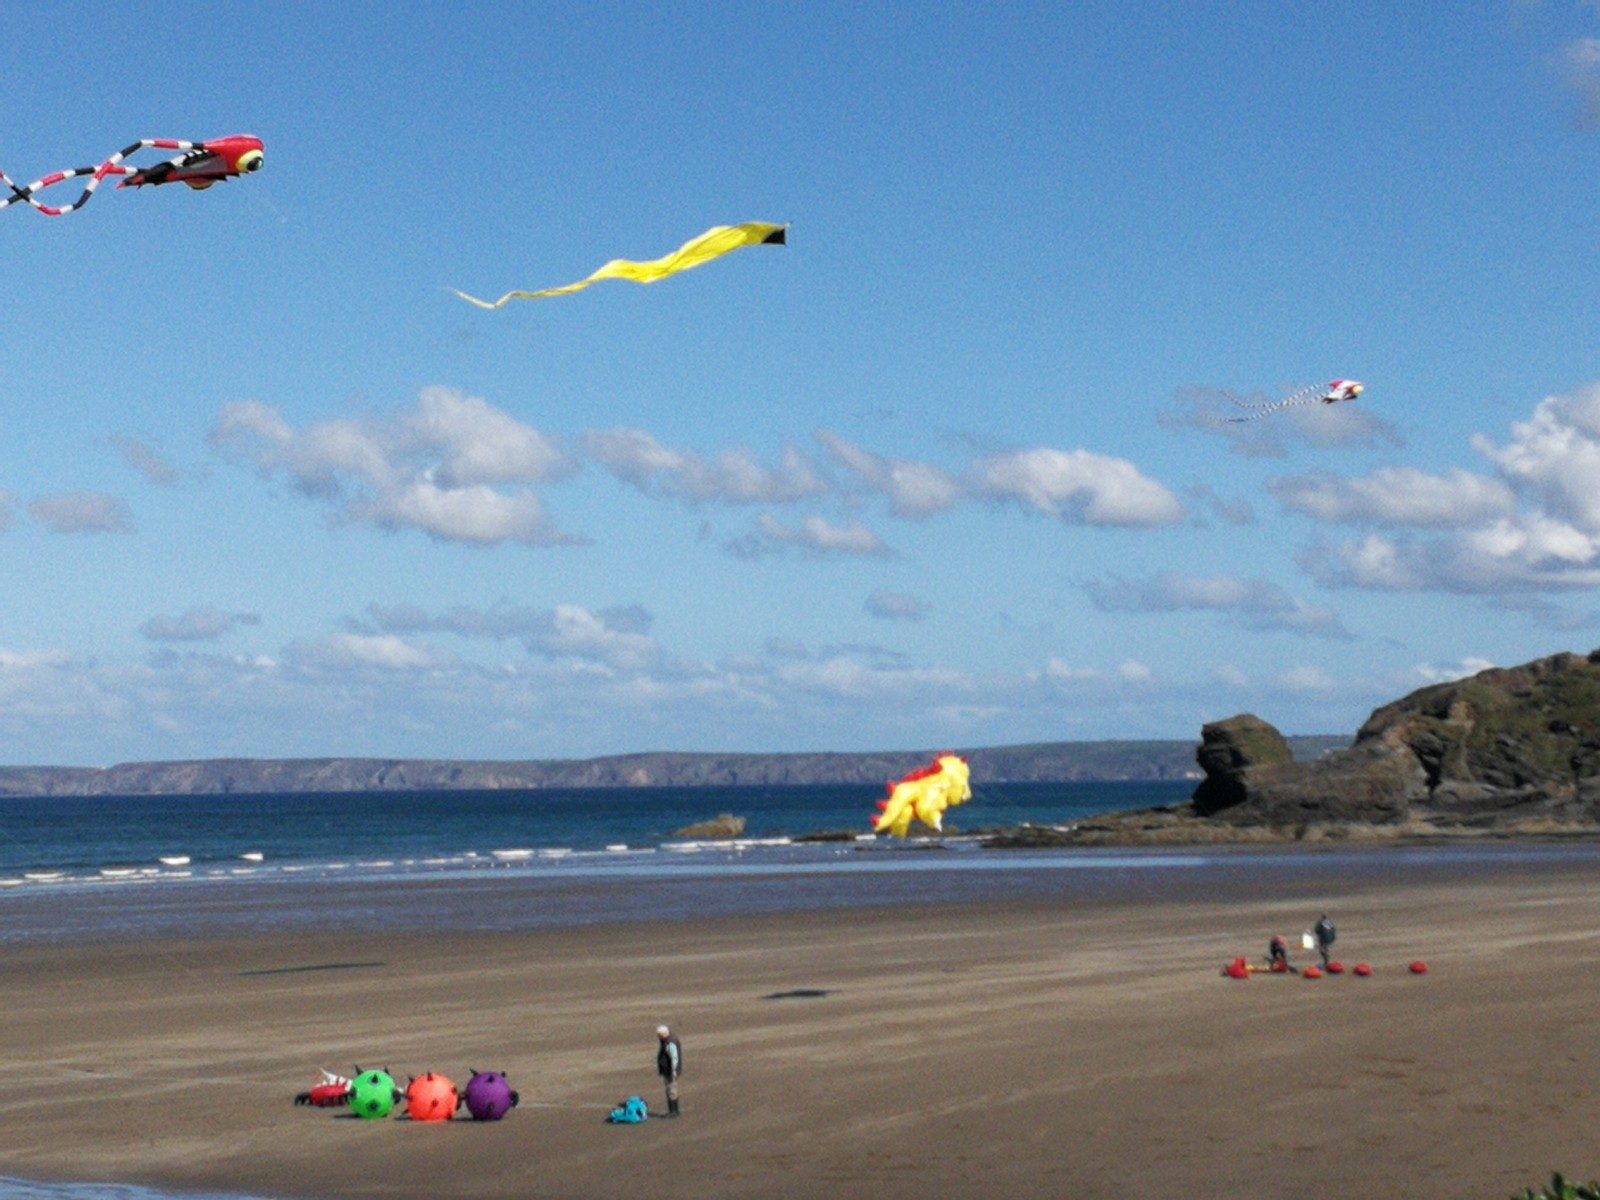 Large kites being flown at the annual gala in May